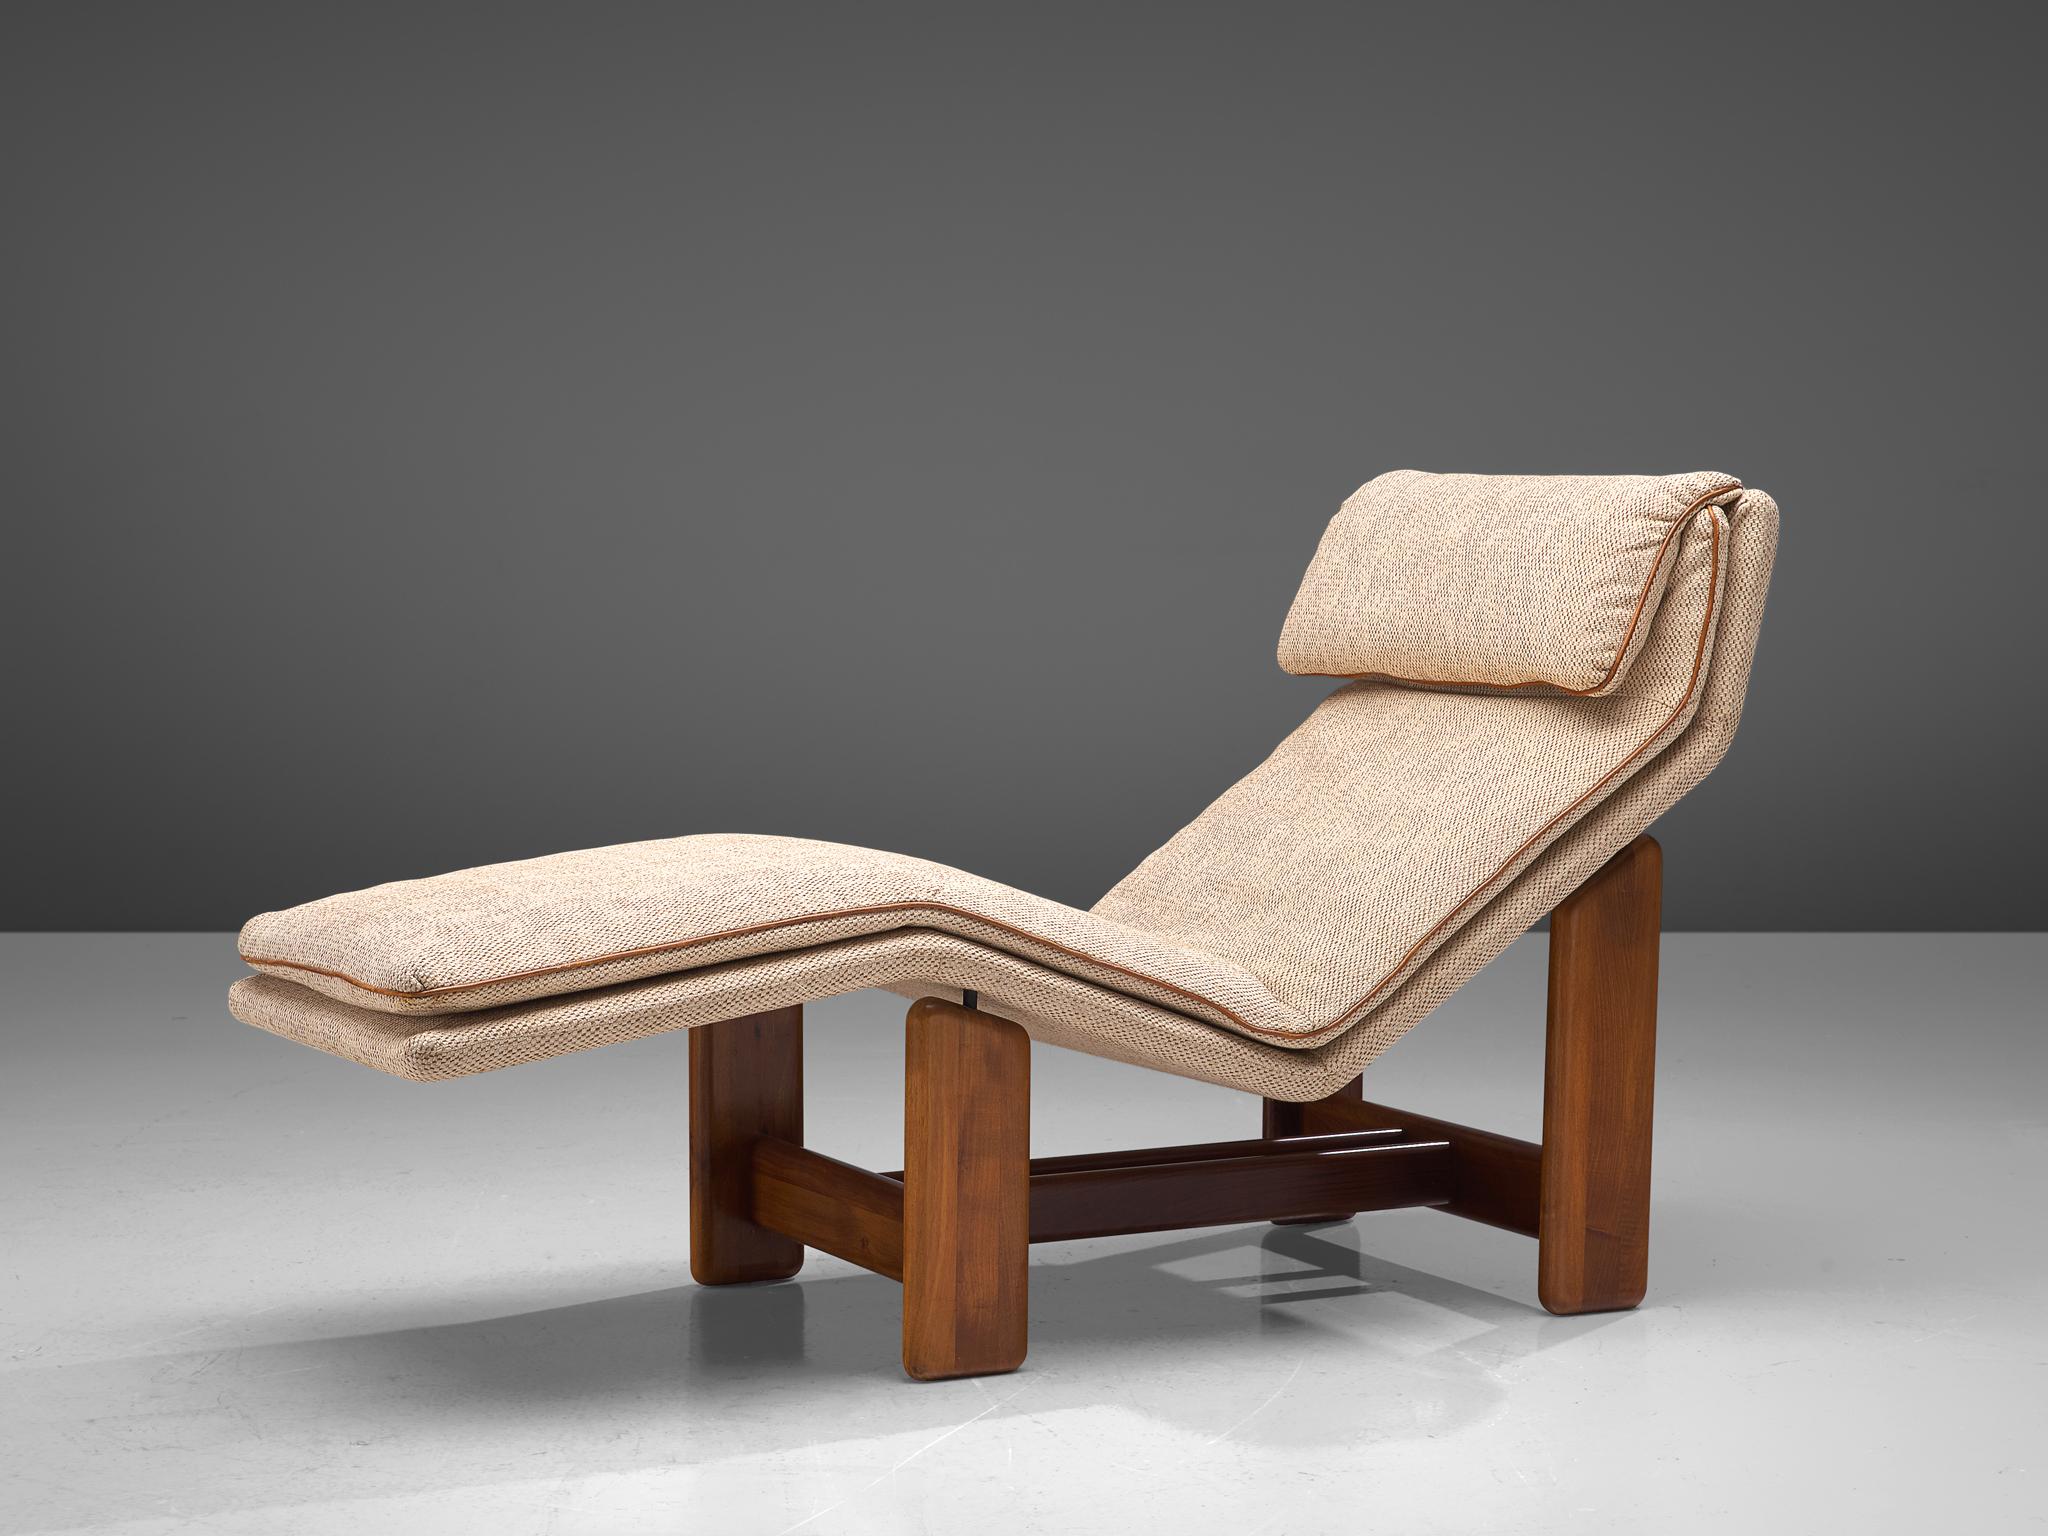 Tarcisio Colzani for Mobil Girgi, daybed, model 'Periplo', fabric, leather and walnut, Italy, 1970s

Sculptural chaise longue from Italy with a woven beige upholstery that is finished with cognac leather piping. The top has a head pillow for extra